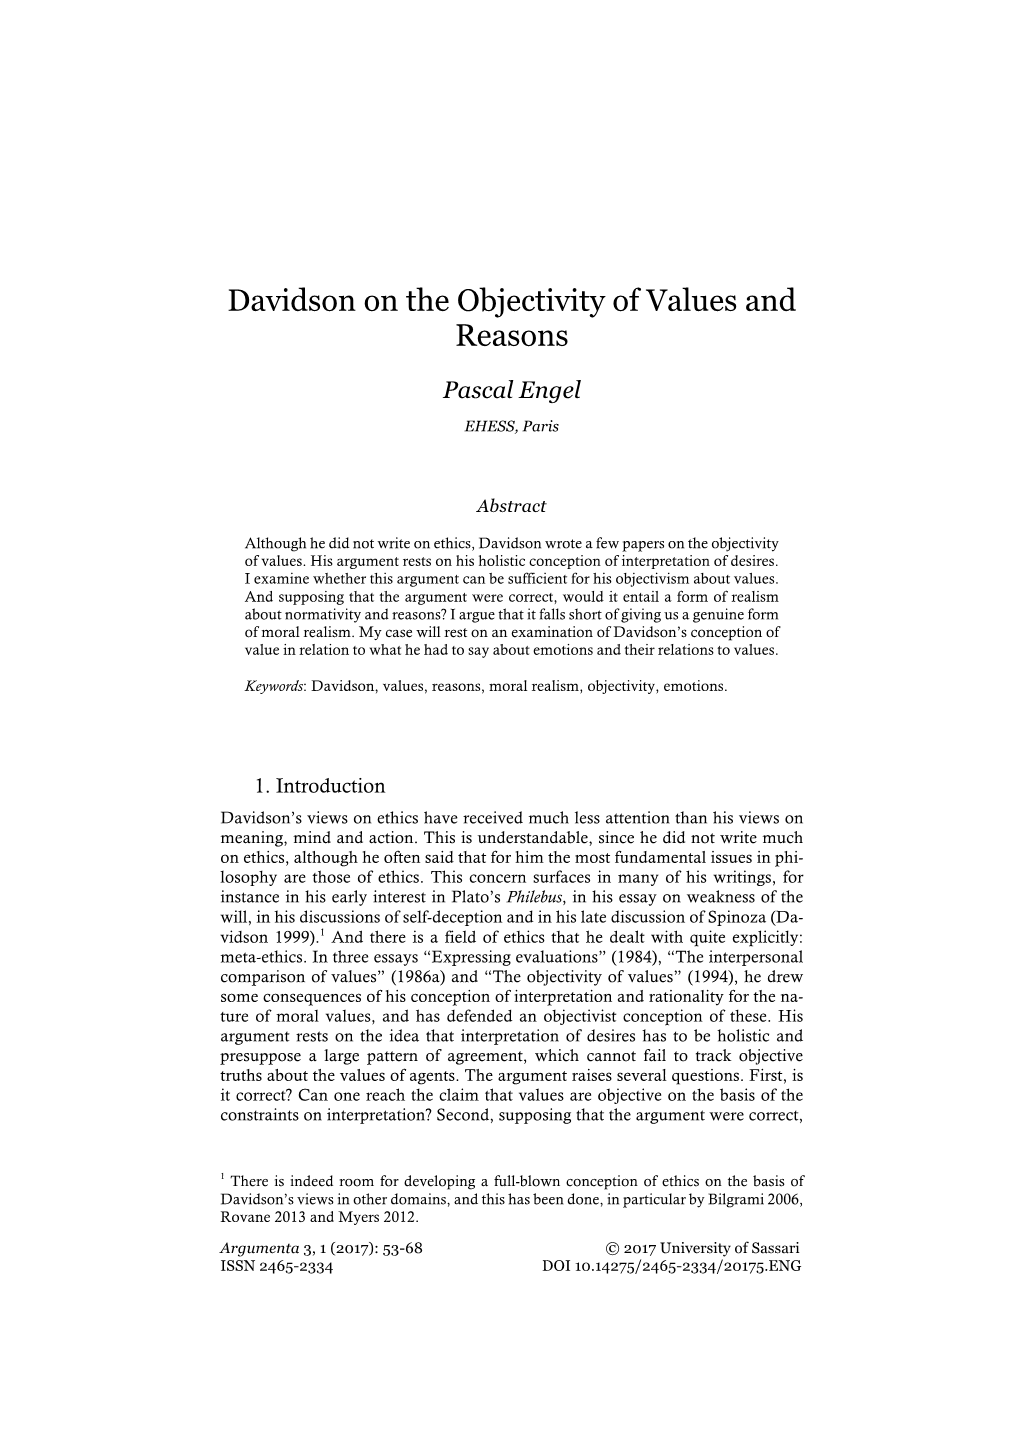 Davidson on the Objectivity of Values and Reasons